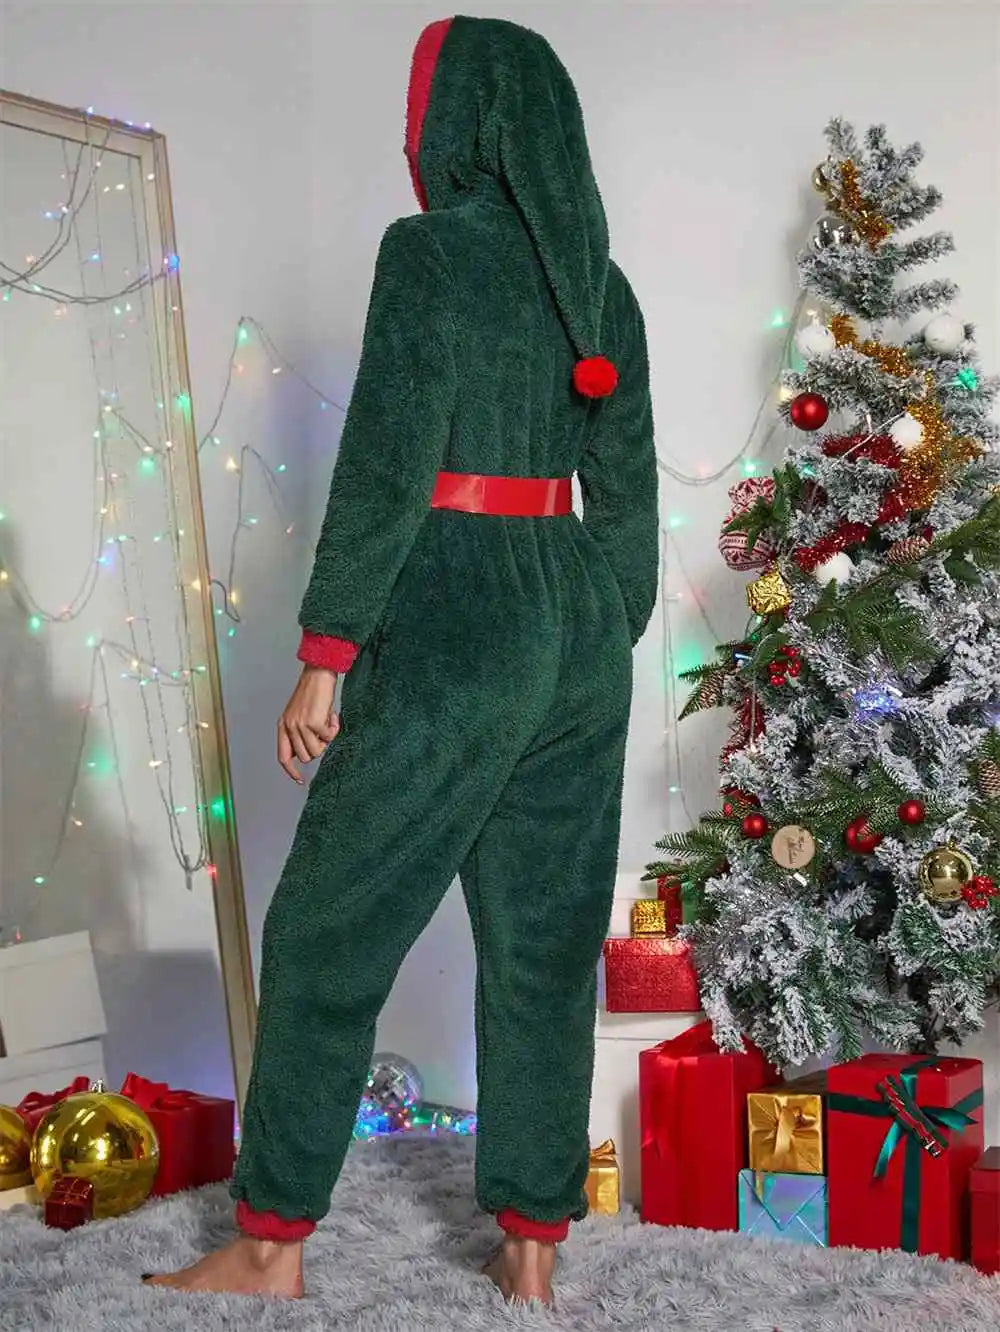 Cosy Green Christmas Onesie - Winter Warmth Meets Festive Style